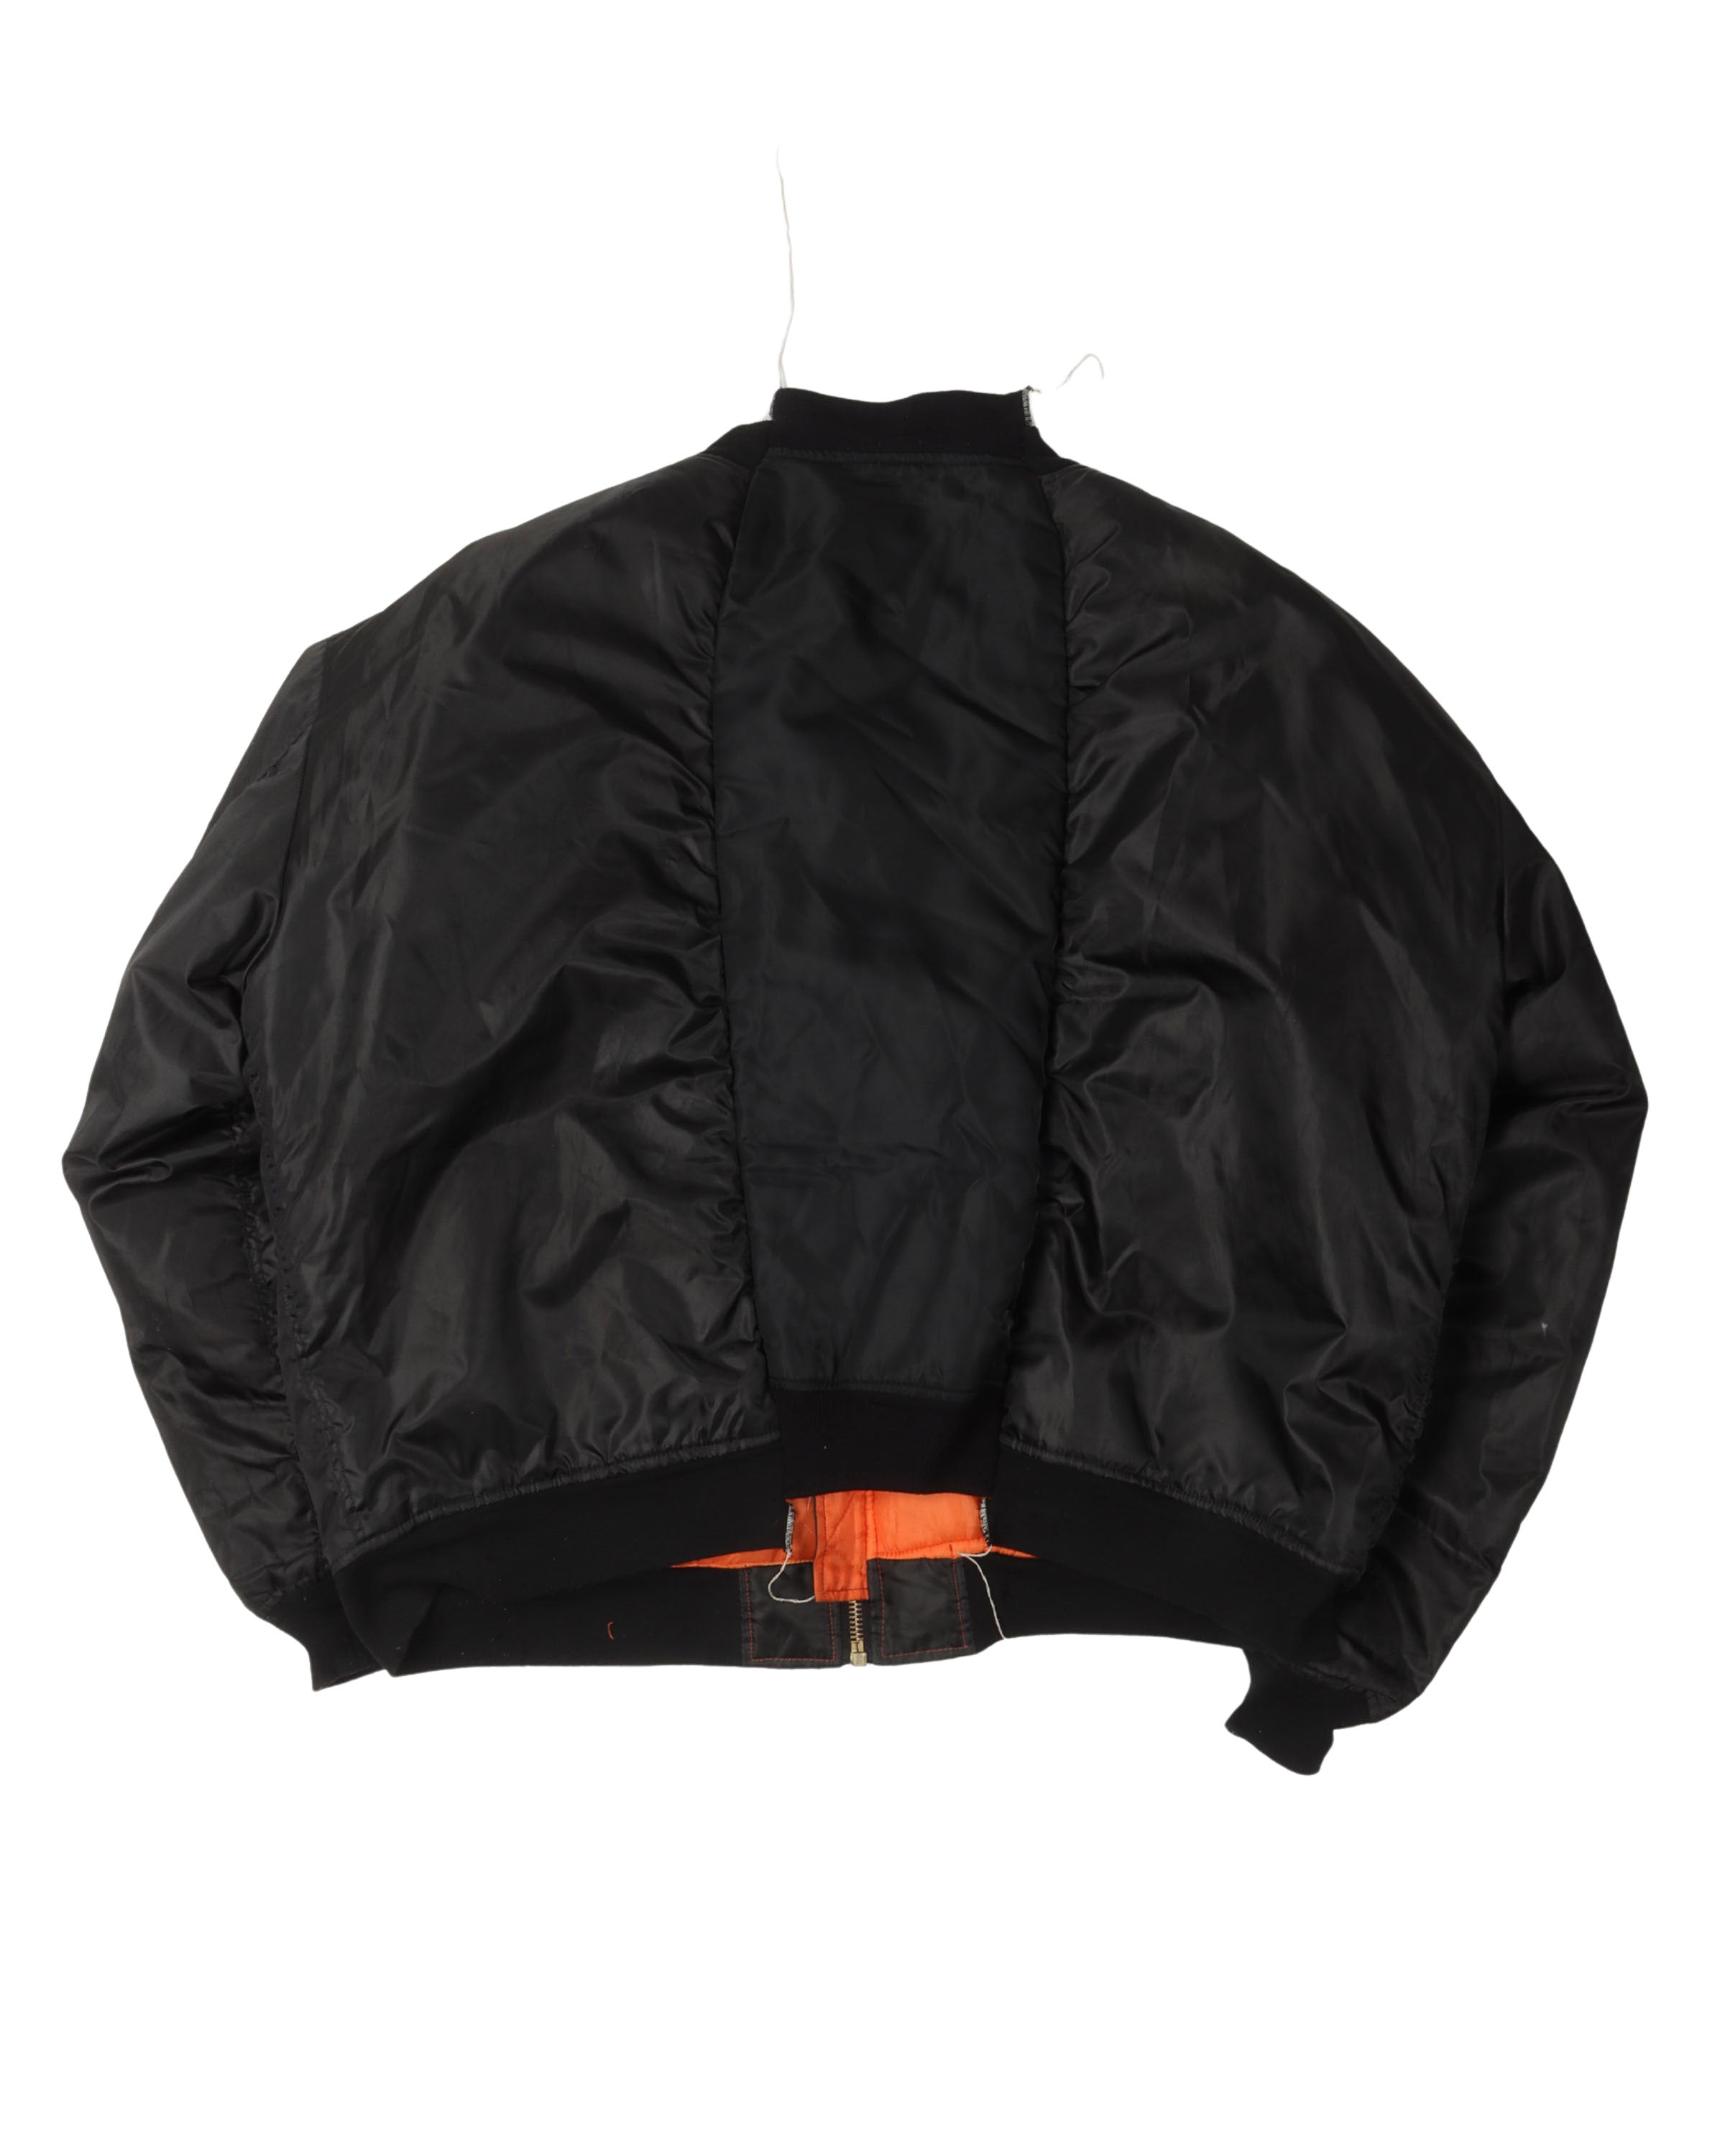 Vetements AW16 Reworked MA-1 Bomber Jacket